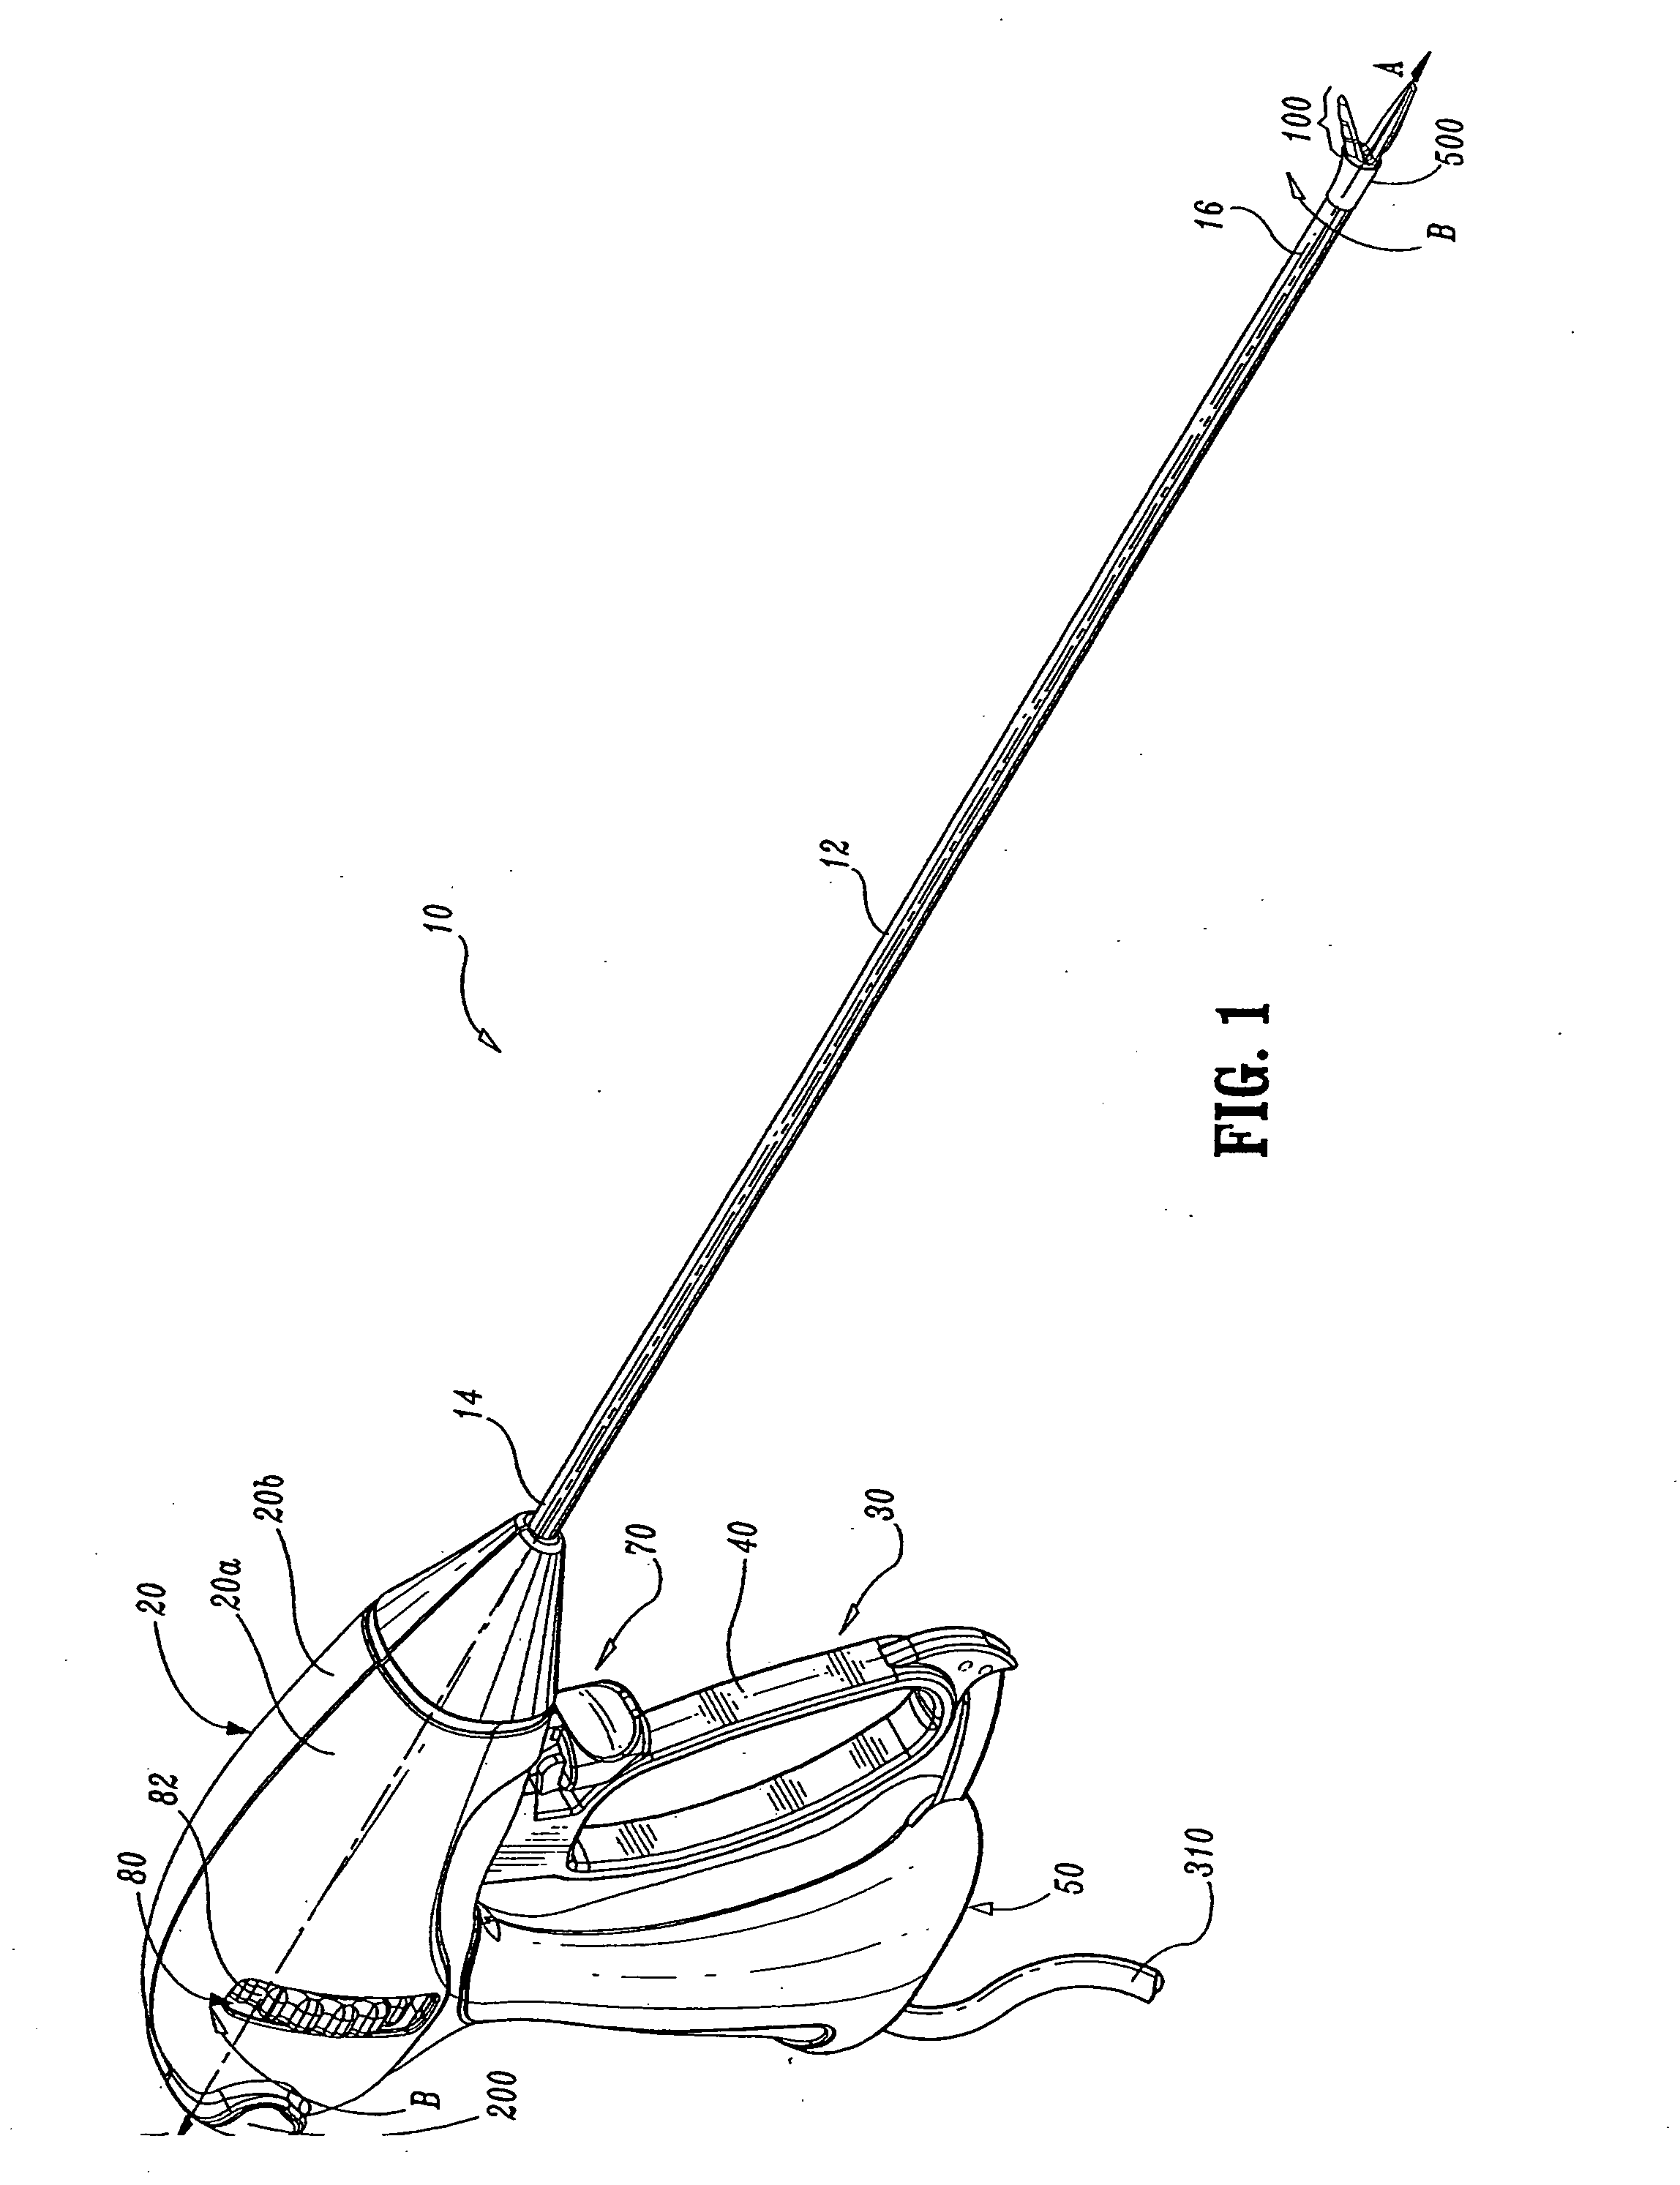 Insulating boot for electrosurgical forceps